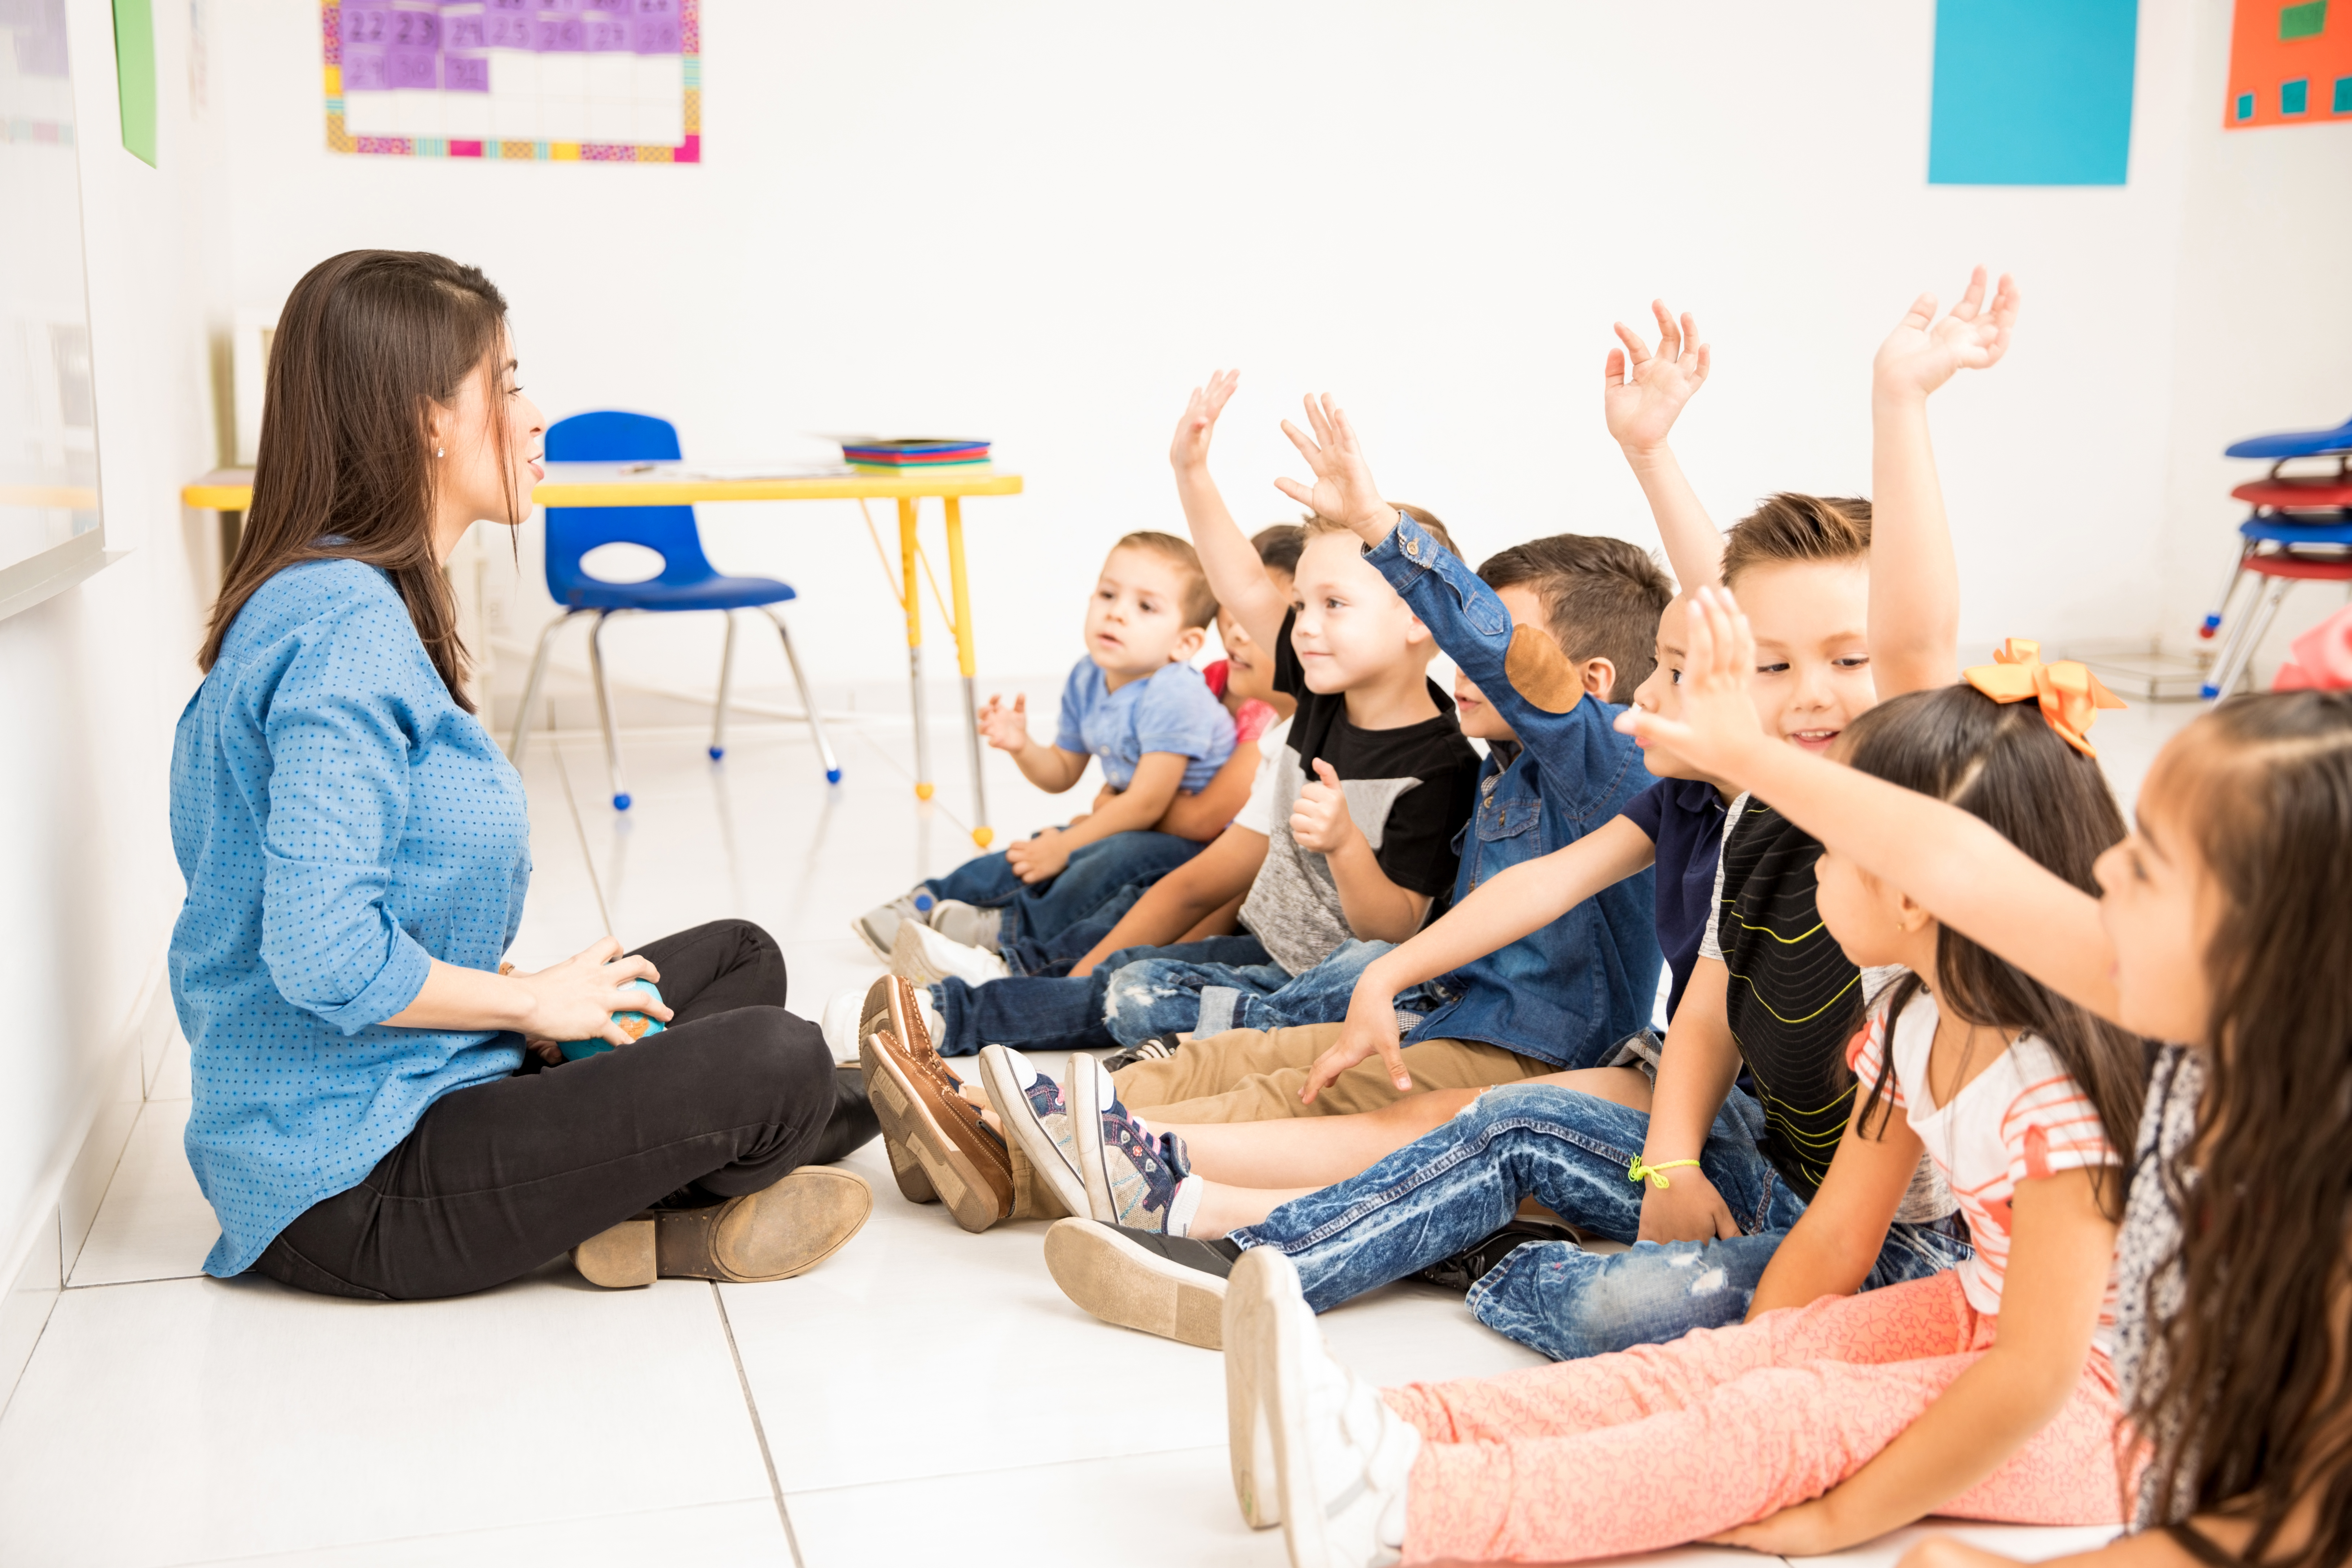 profile-view-of-group-of-preschool-students-raising-their-hands-and-trying-to-participate-at-school.jpg